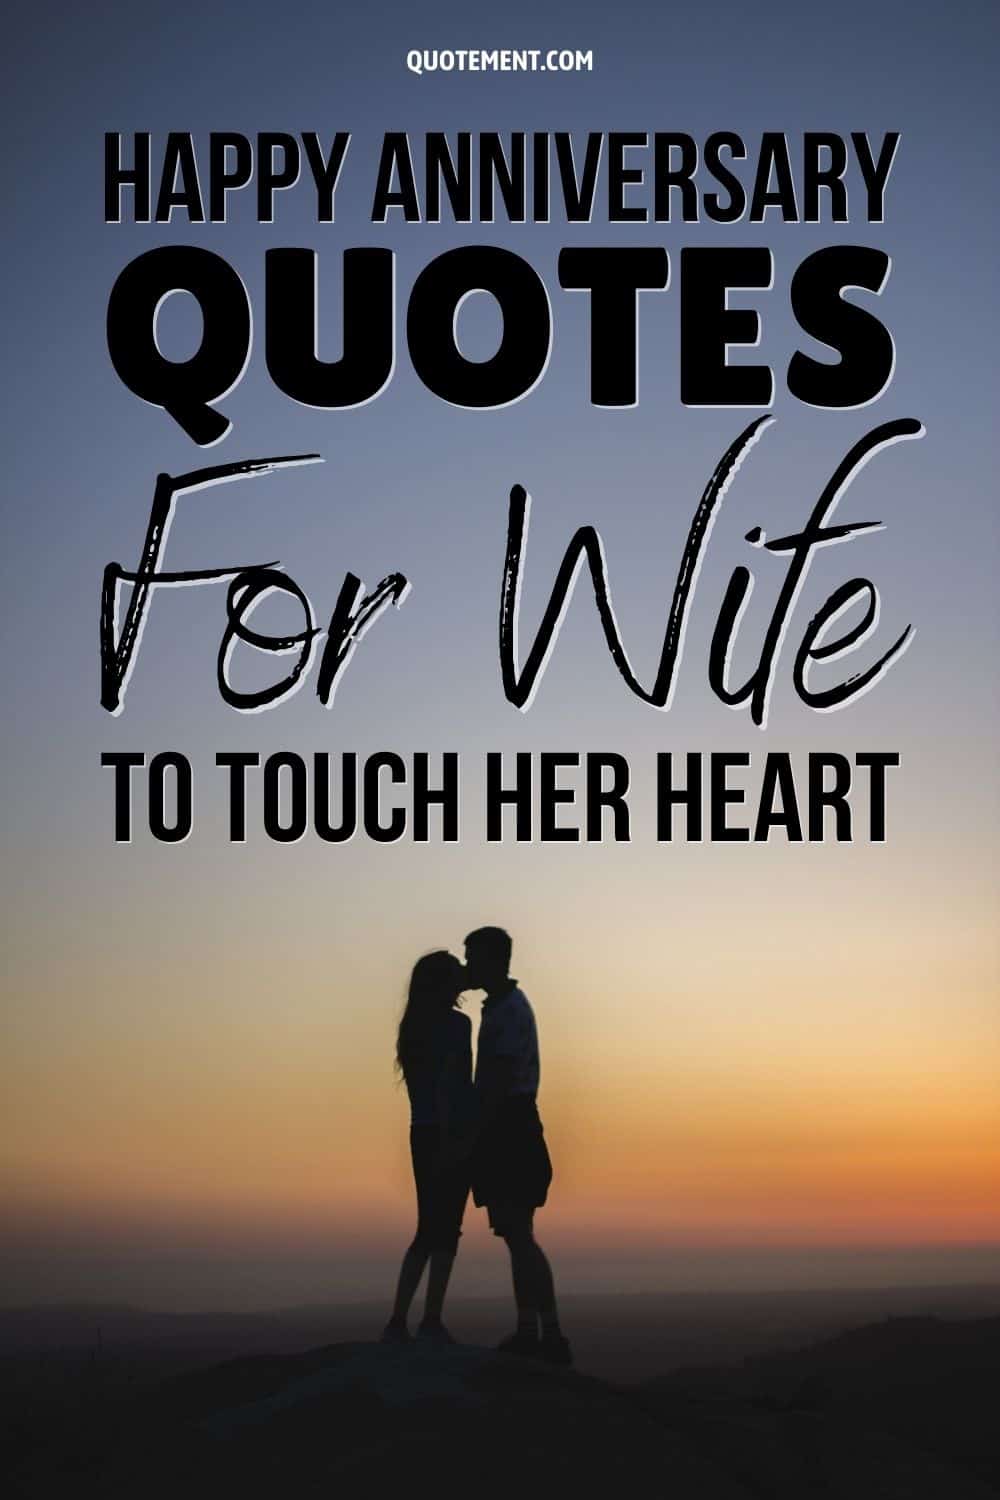 150 Happy Anniversary Quotes For Wife To Touch Her Heart
